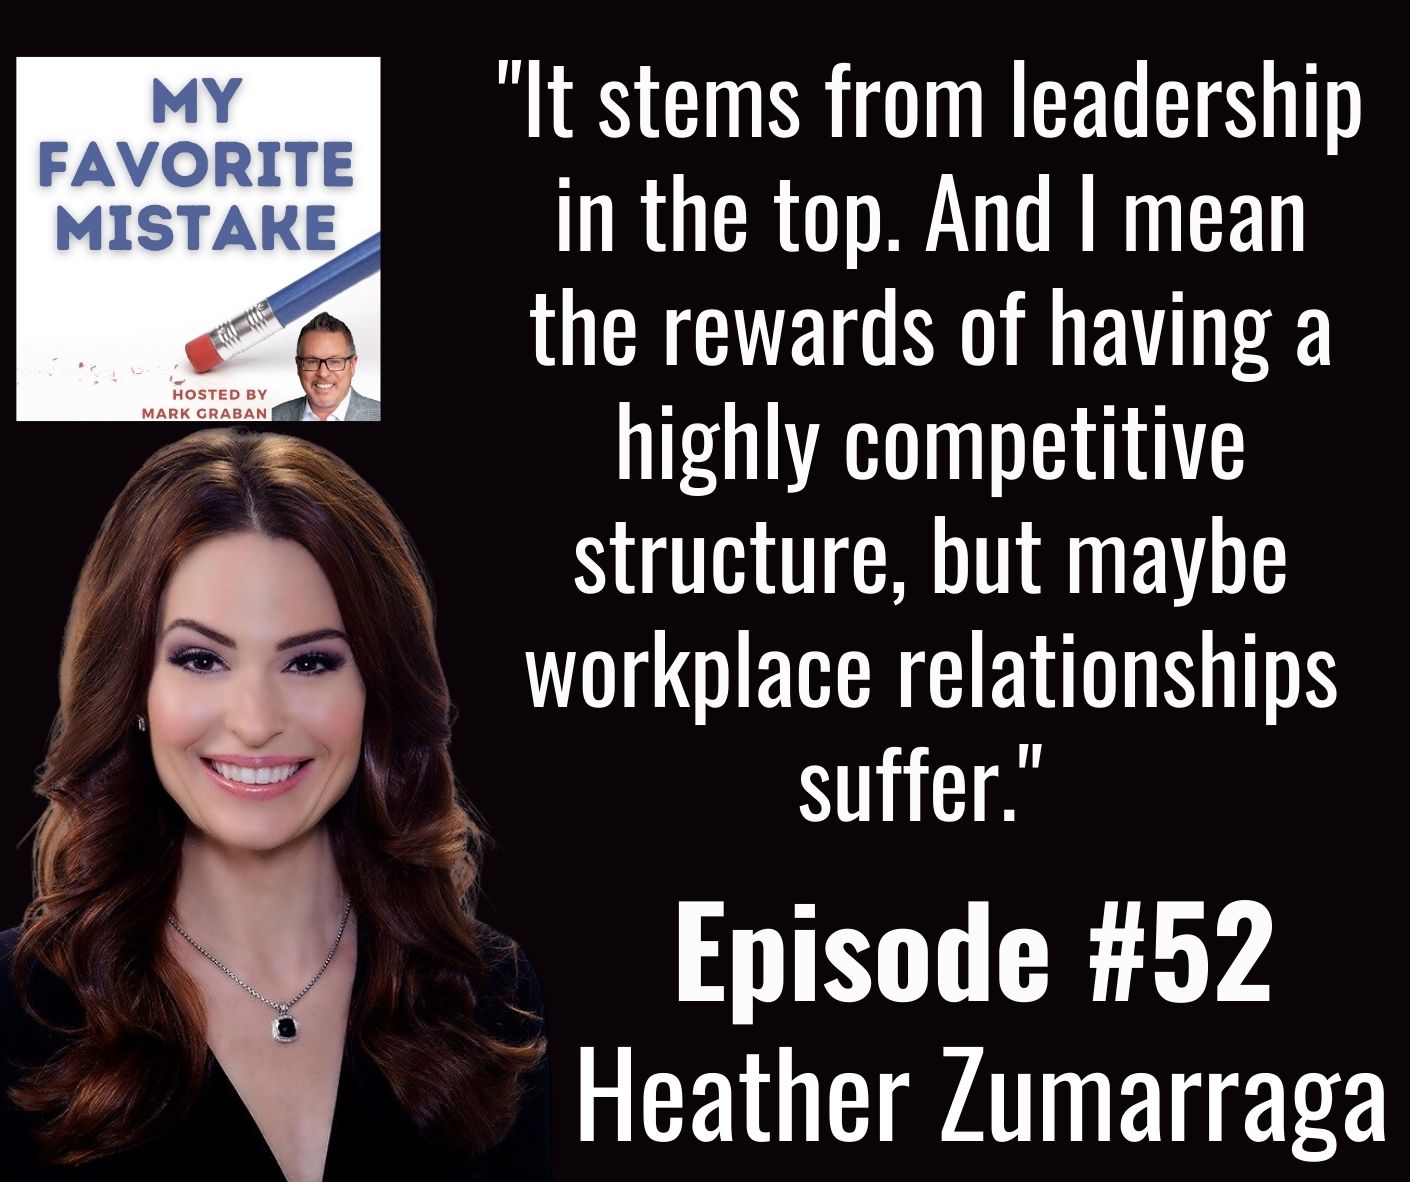 "It stems from leadership in the top. And I mean the rewards of having a highly competitive structure, but maybe workplace relationships suffer." 